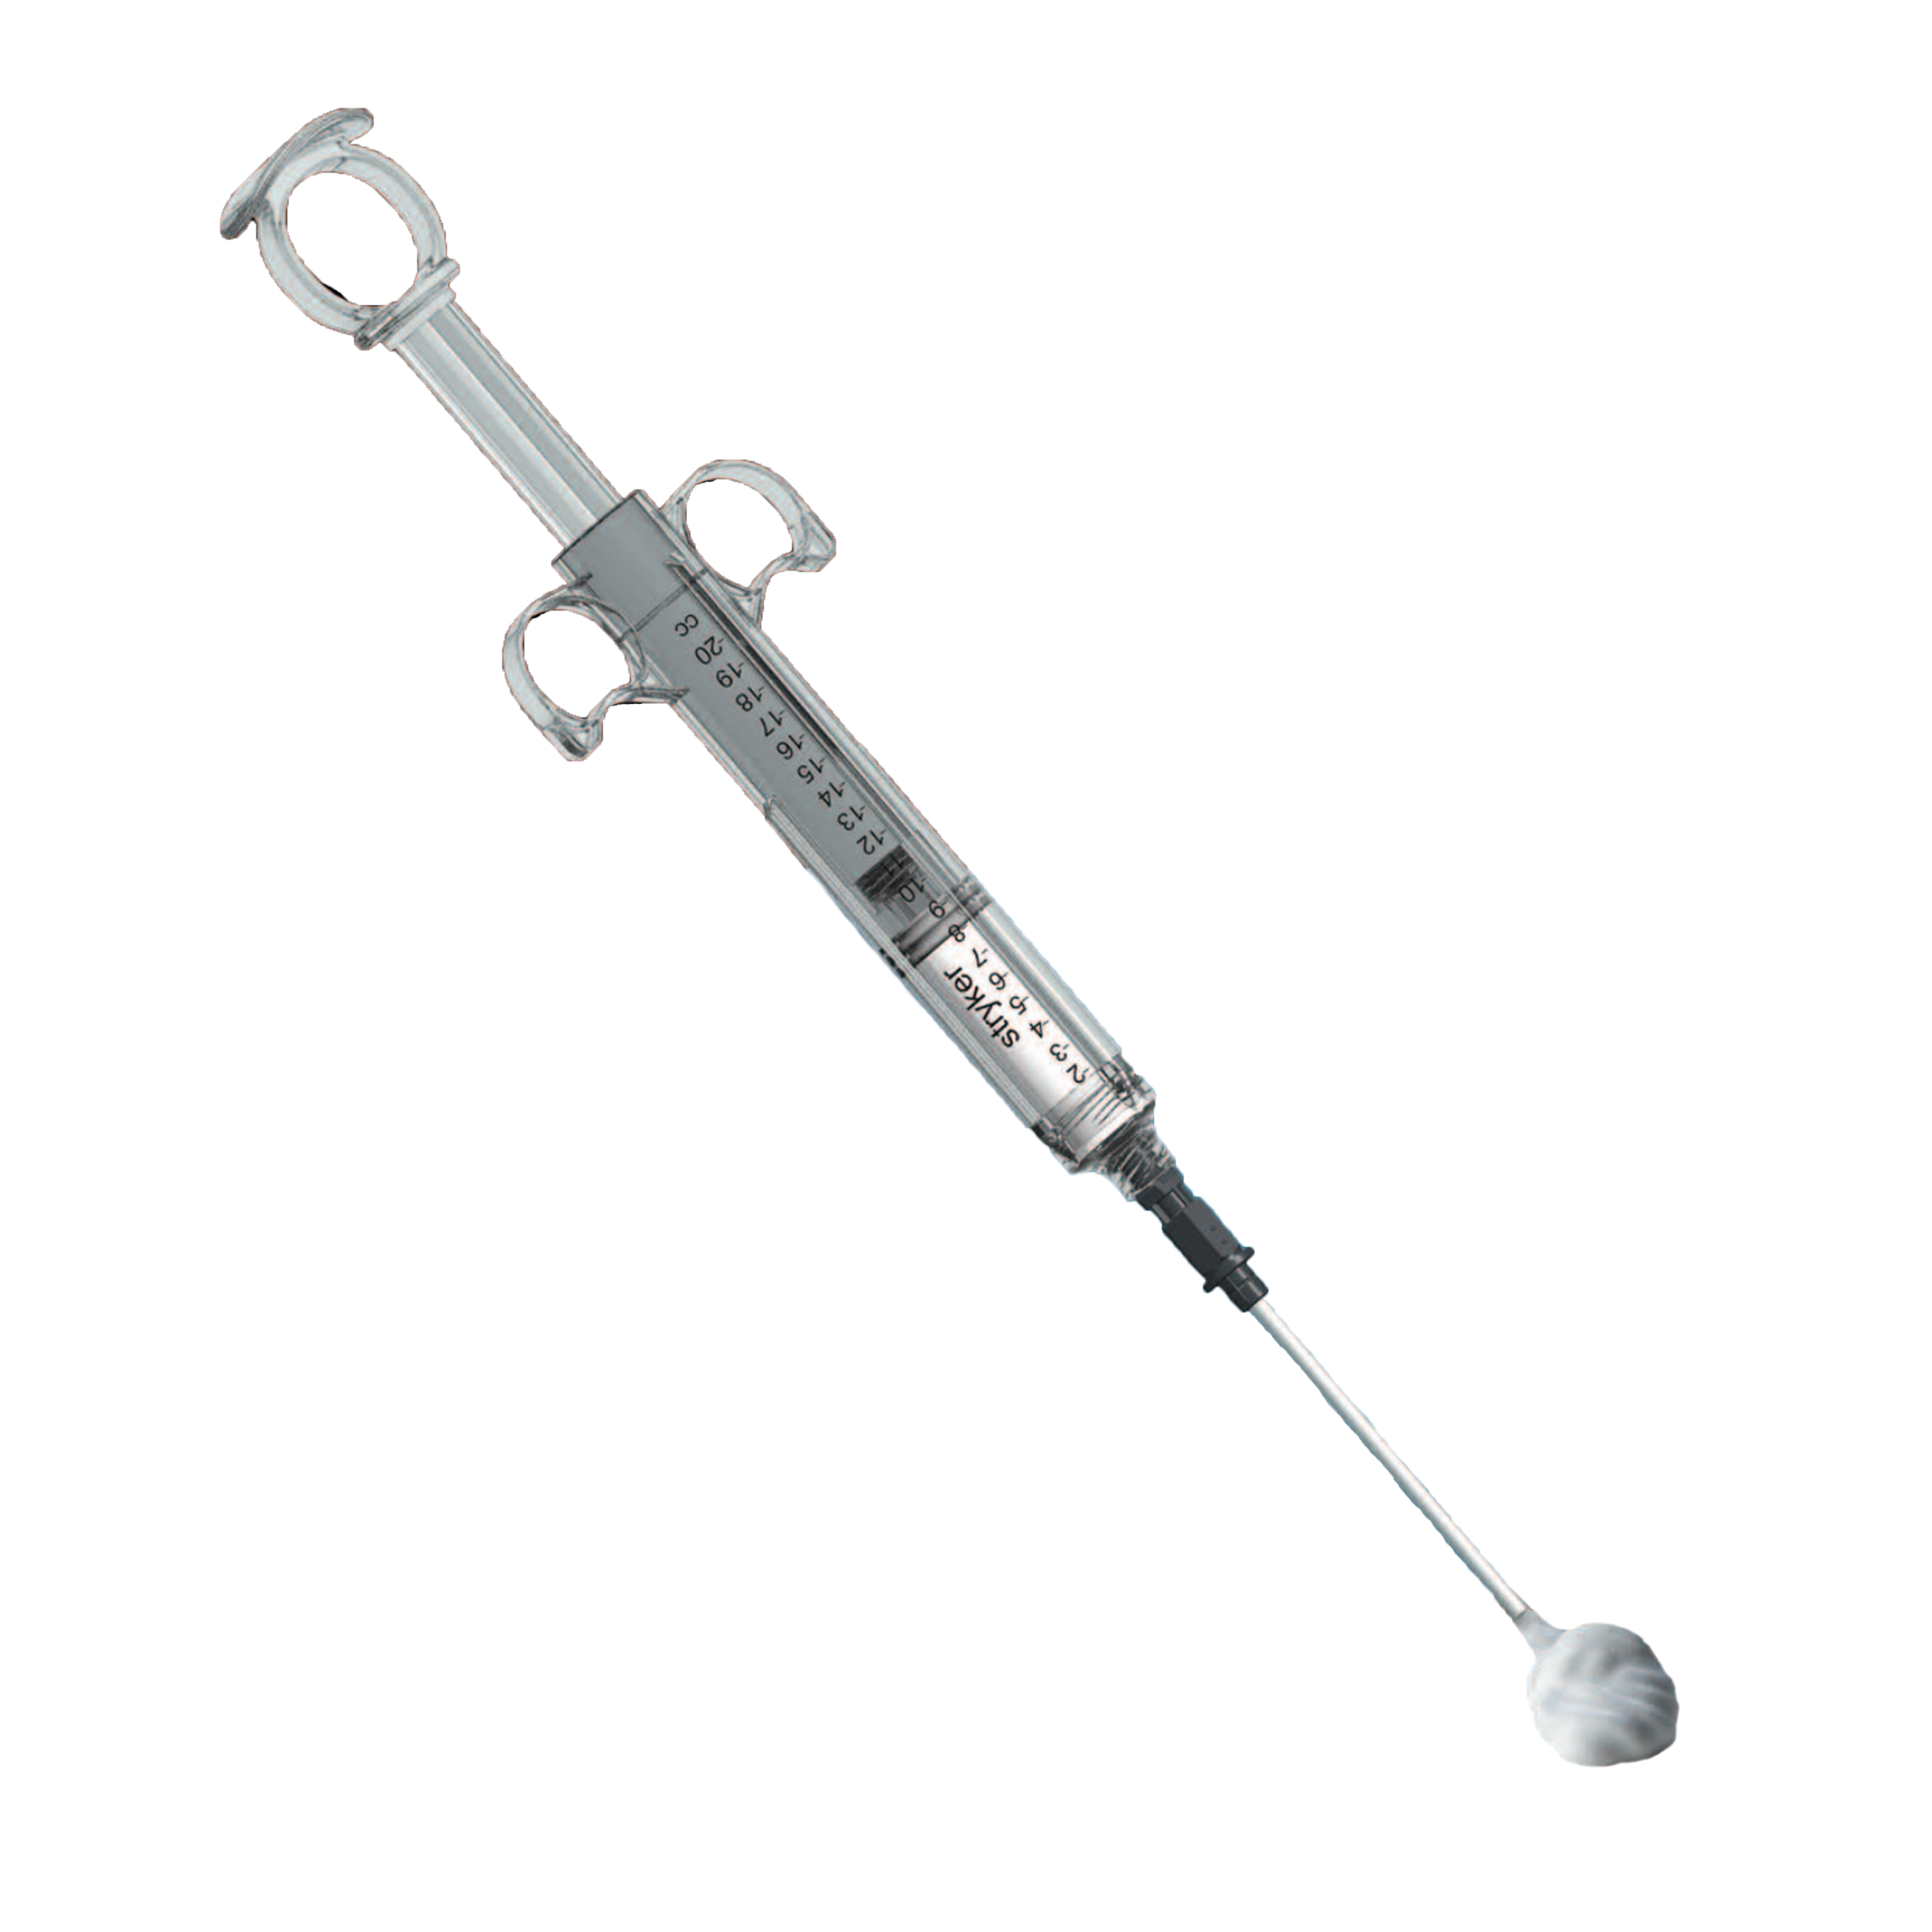 HydroSet | HydroSet represents the next generation in bone substitute technology intended for a wide variety of clinical applications in multiple surgical specialties.